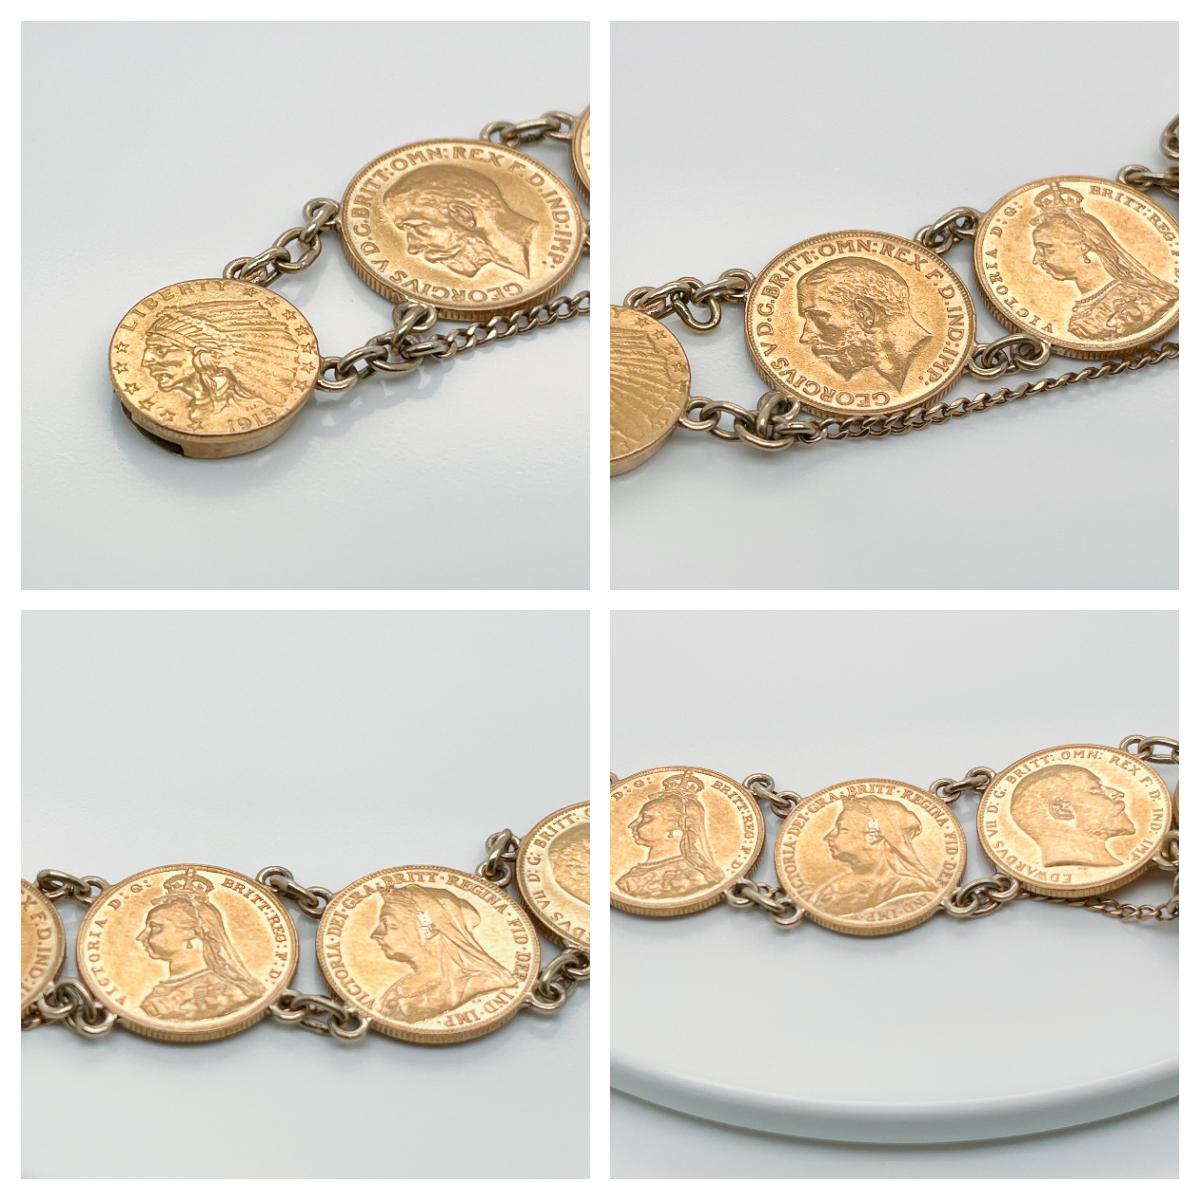 Antique Coin Bracelet with American Gold Coins & English Gold Sovereigns 1